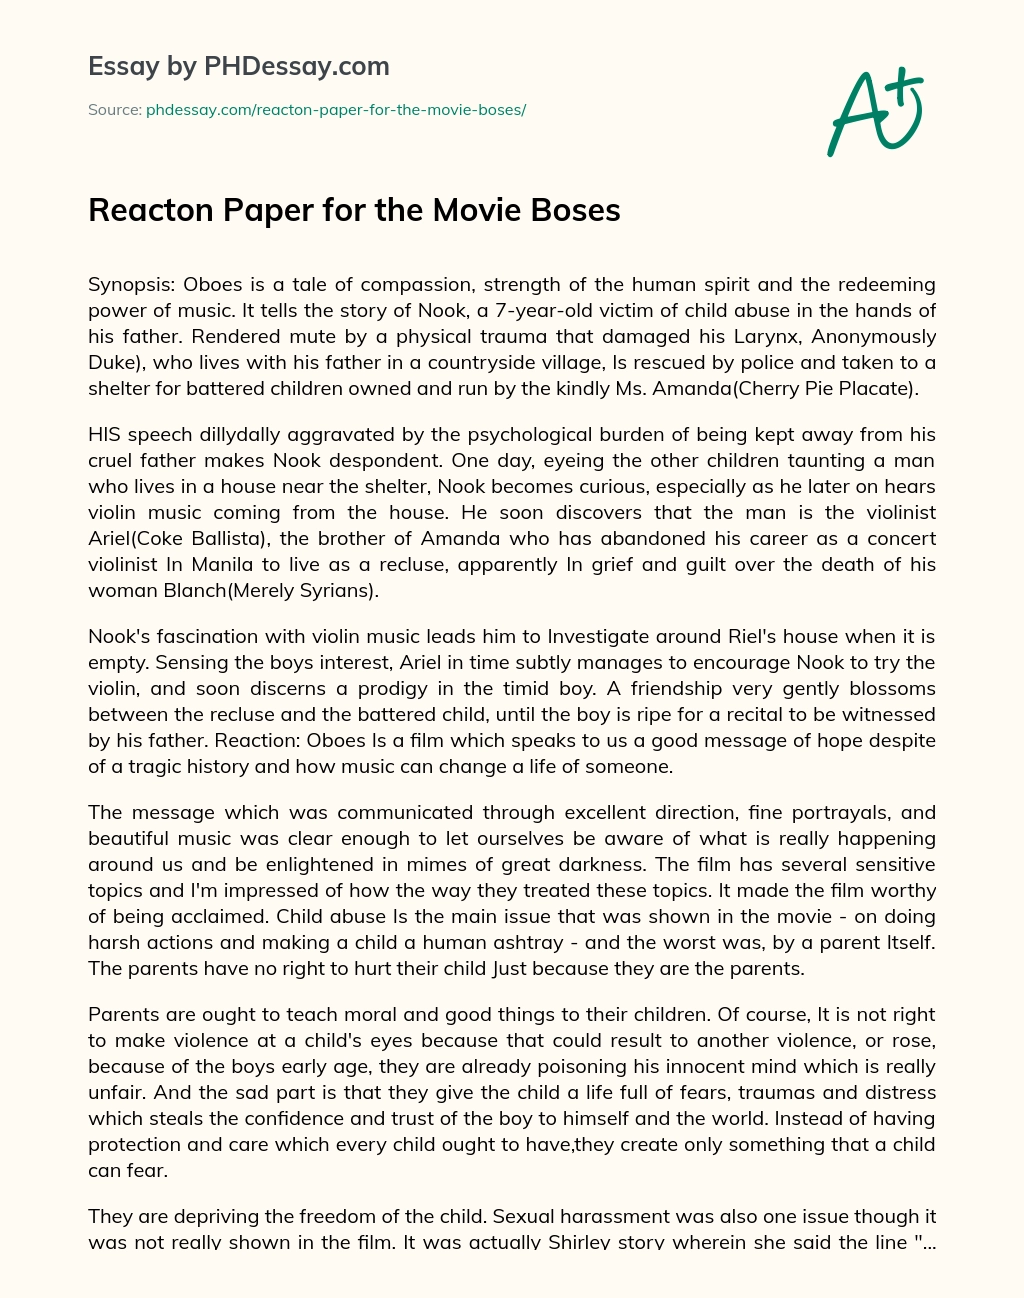 Reacton Paper for the Movie Boses - PHDessay.com